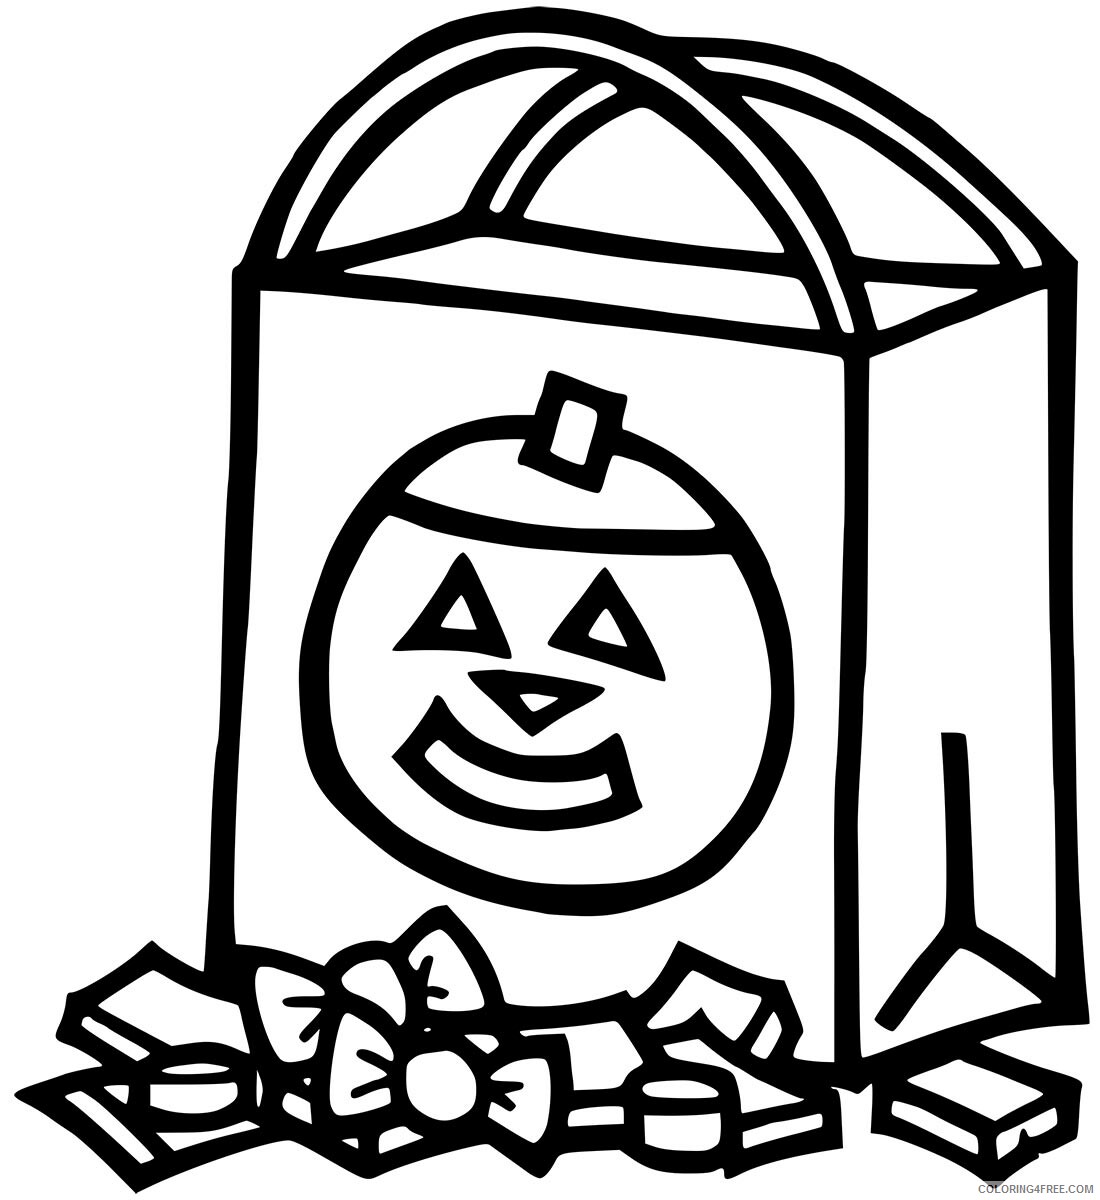 Halloween Coloring Pages Holiday Trick or Treat Bag Halloween Printable 2021 0686 Coloring4free